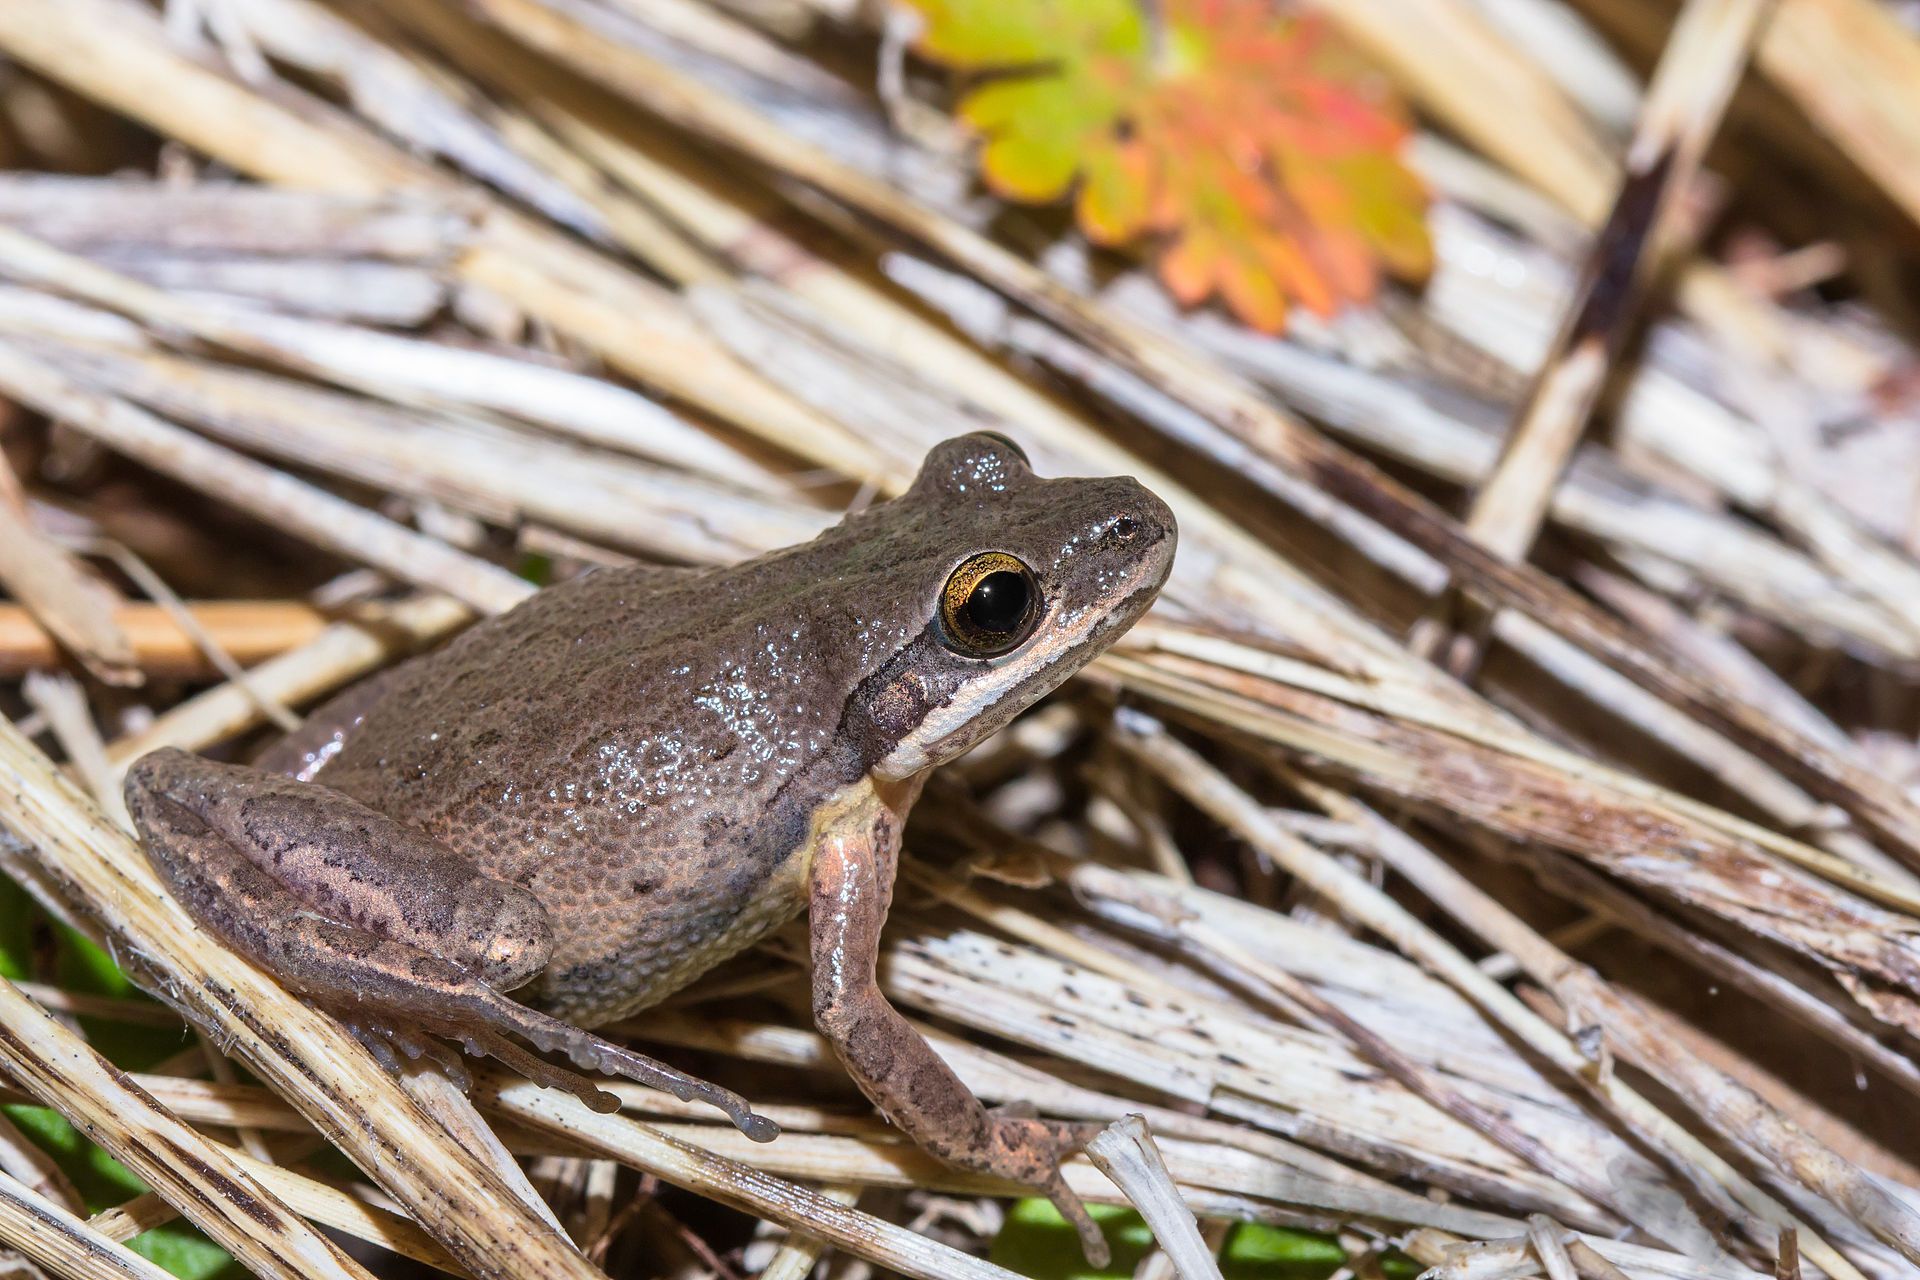 Frog mating season in the Ozarks caught on video